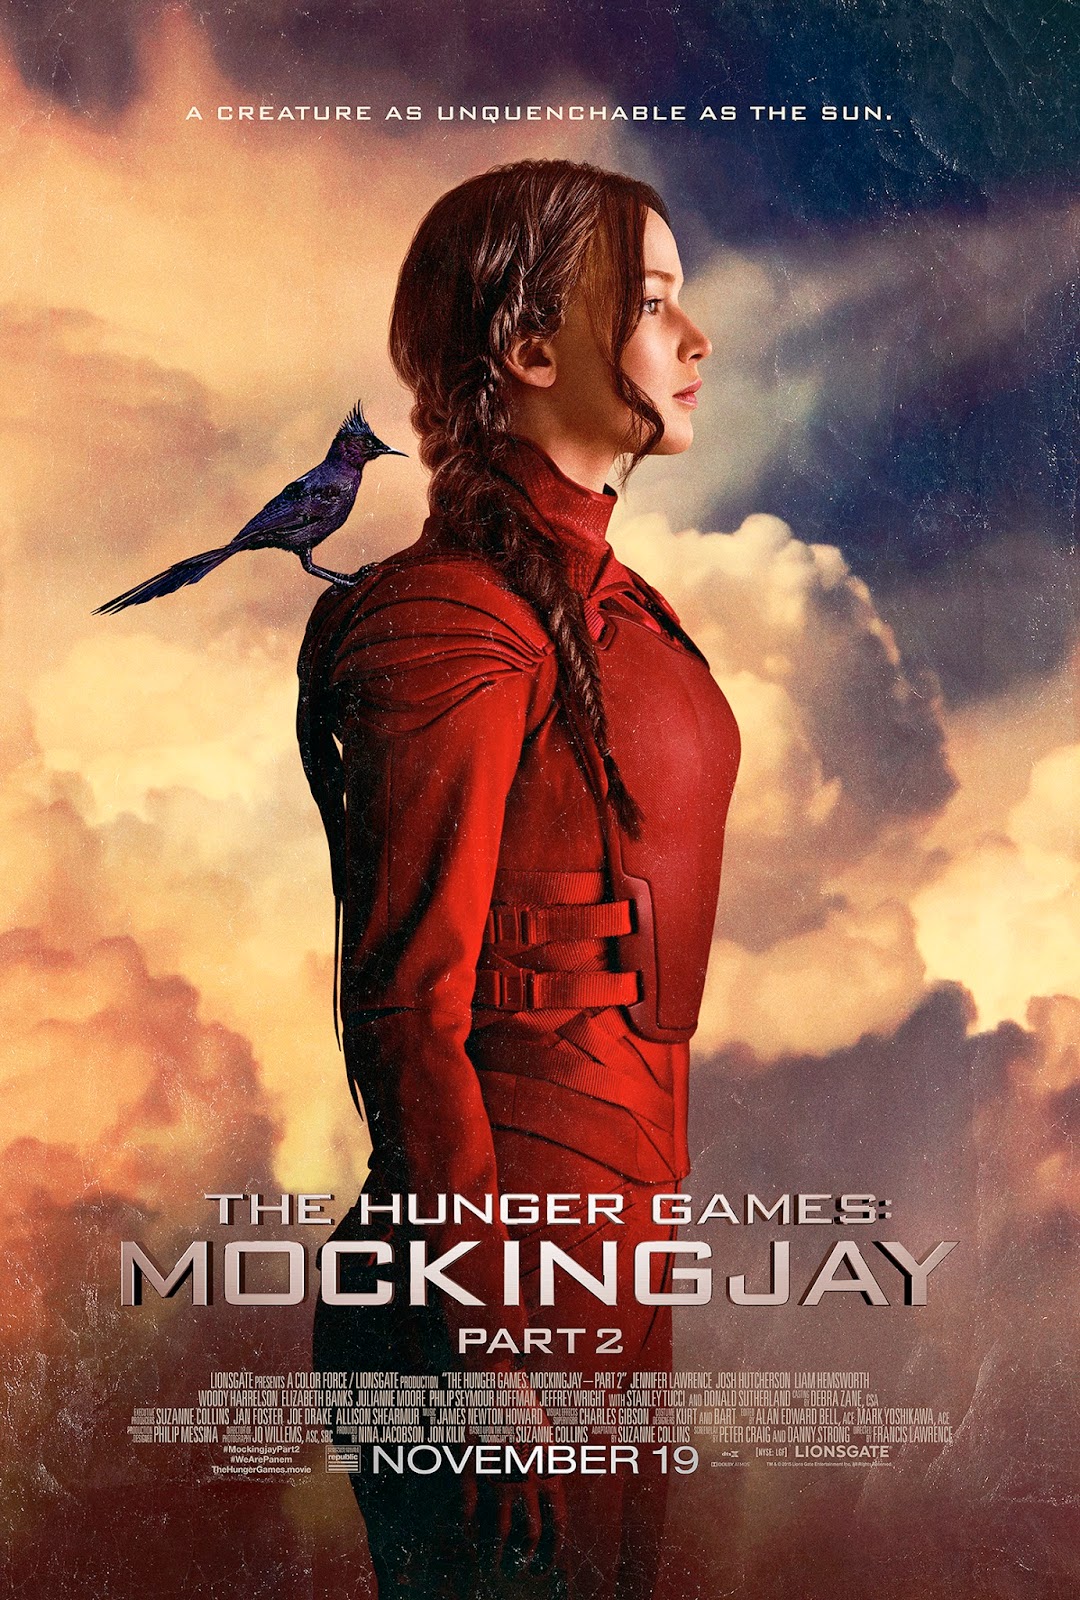 Film vs. Book: Celebrate Mockingjay Part 2 with the Hunger 